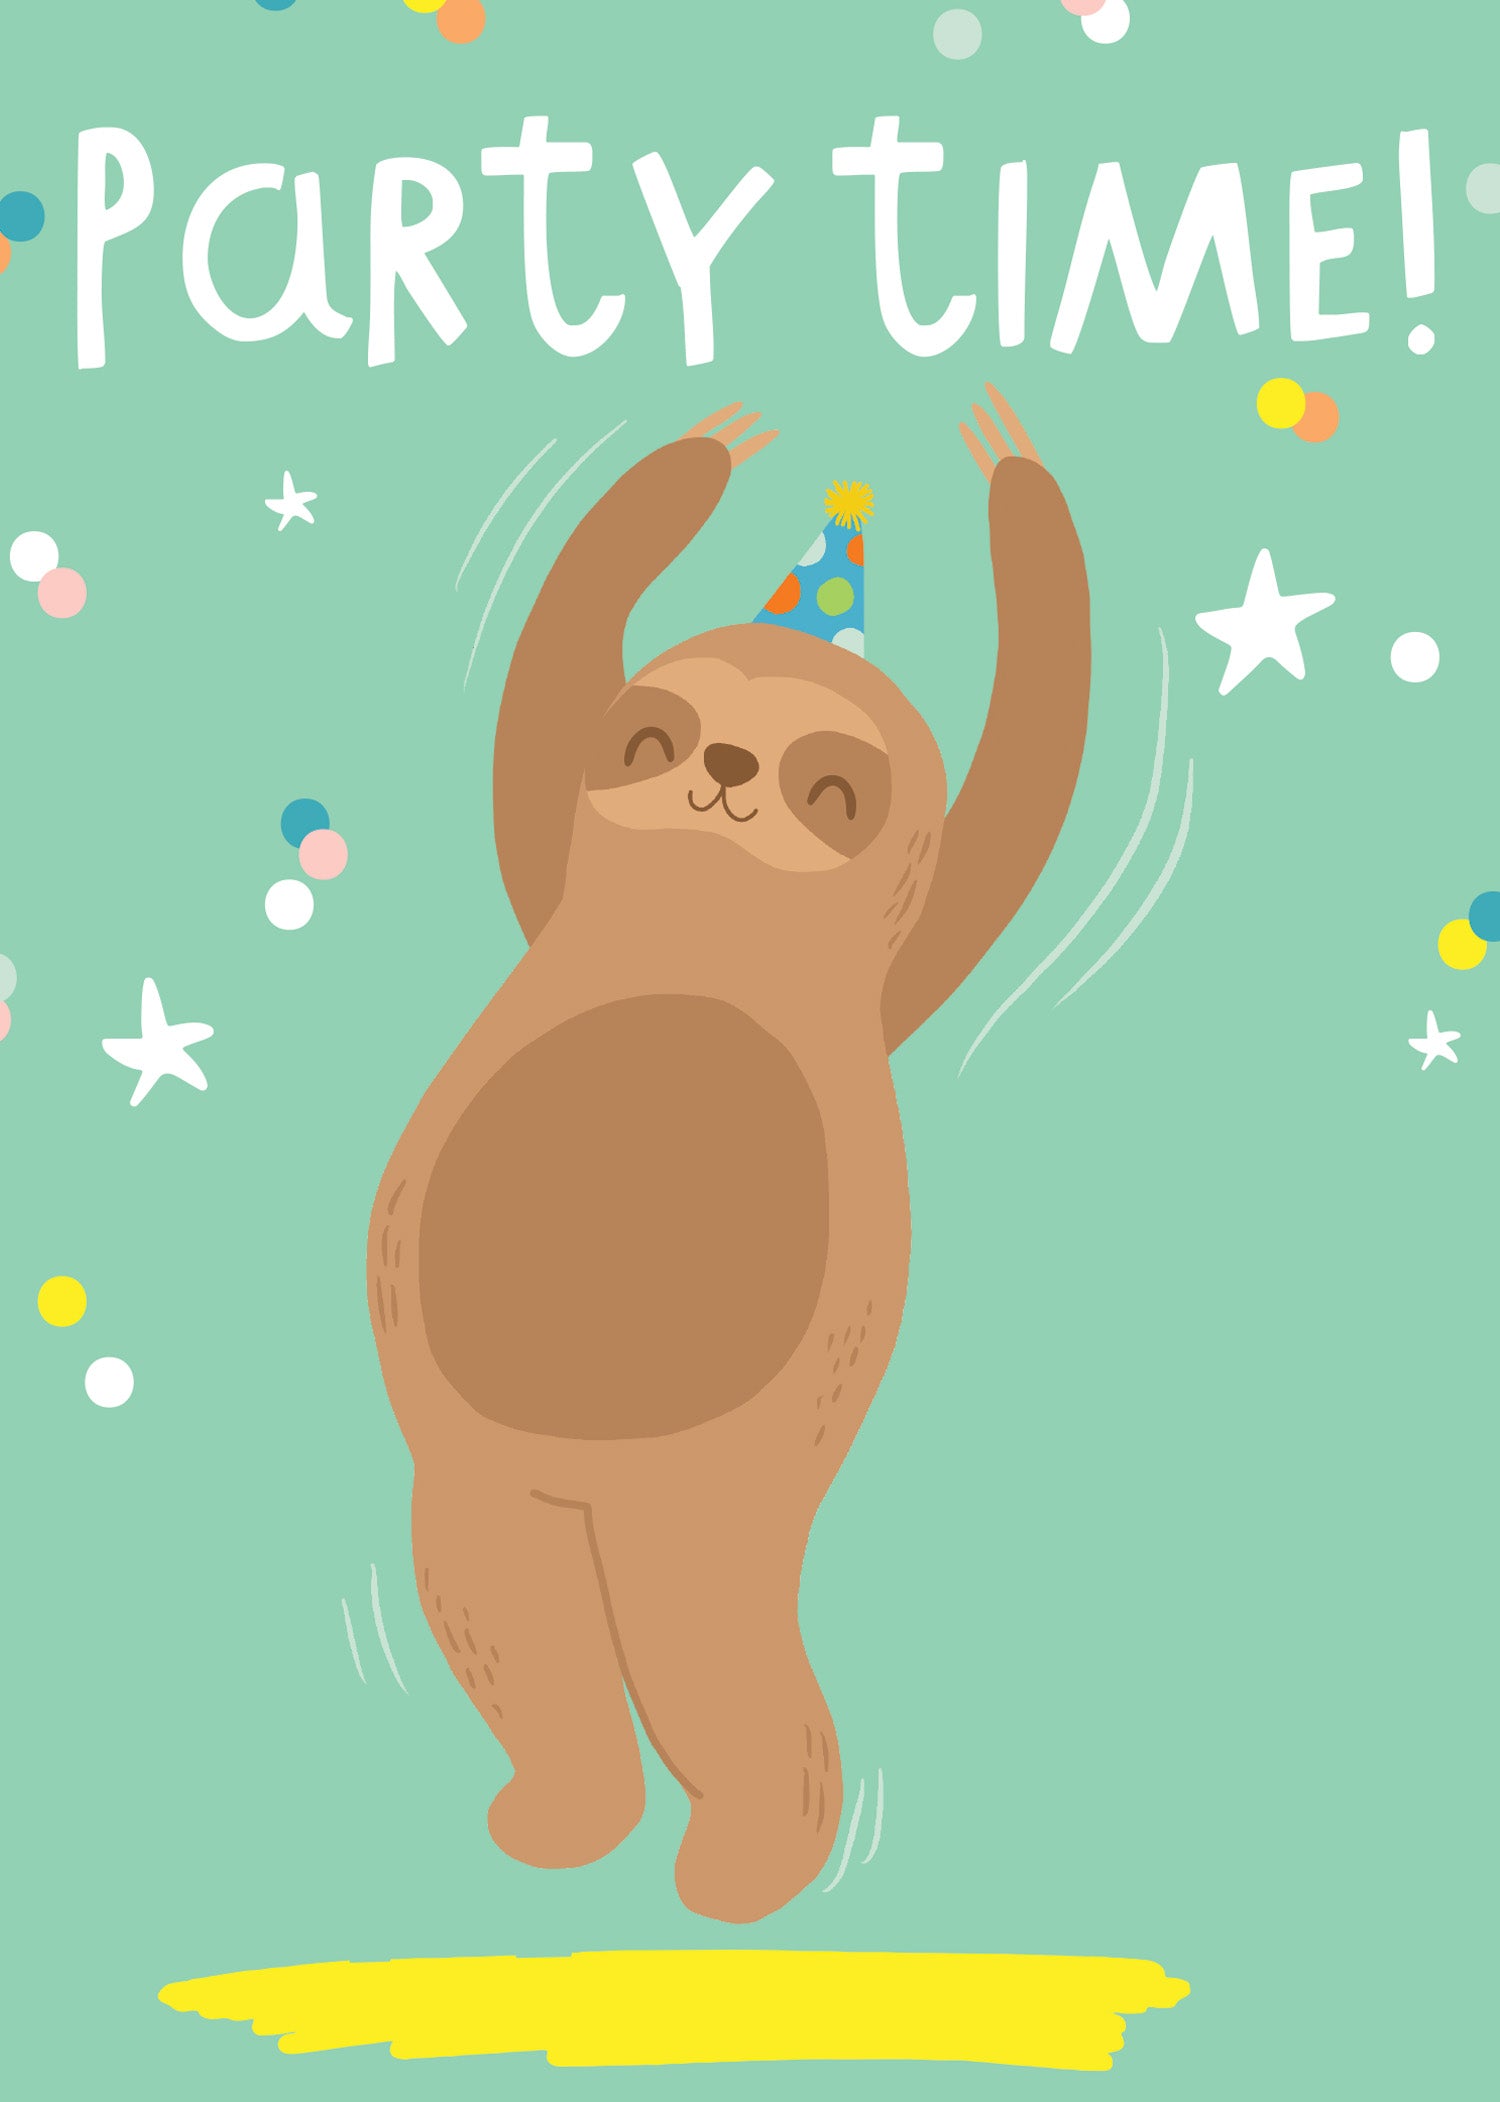 Greeting Card - Party Pals - Party Sloth